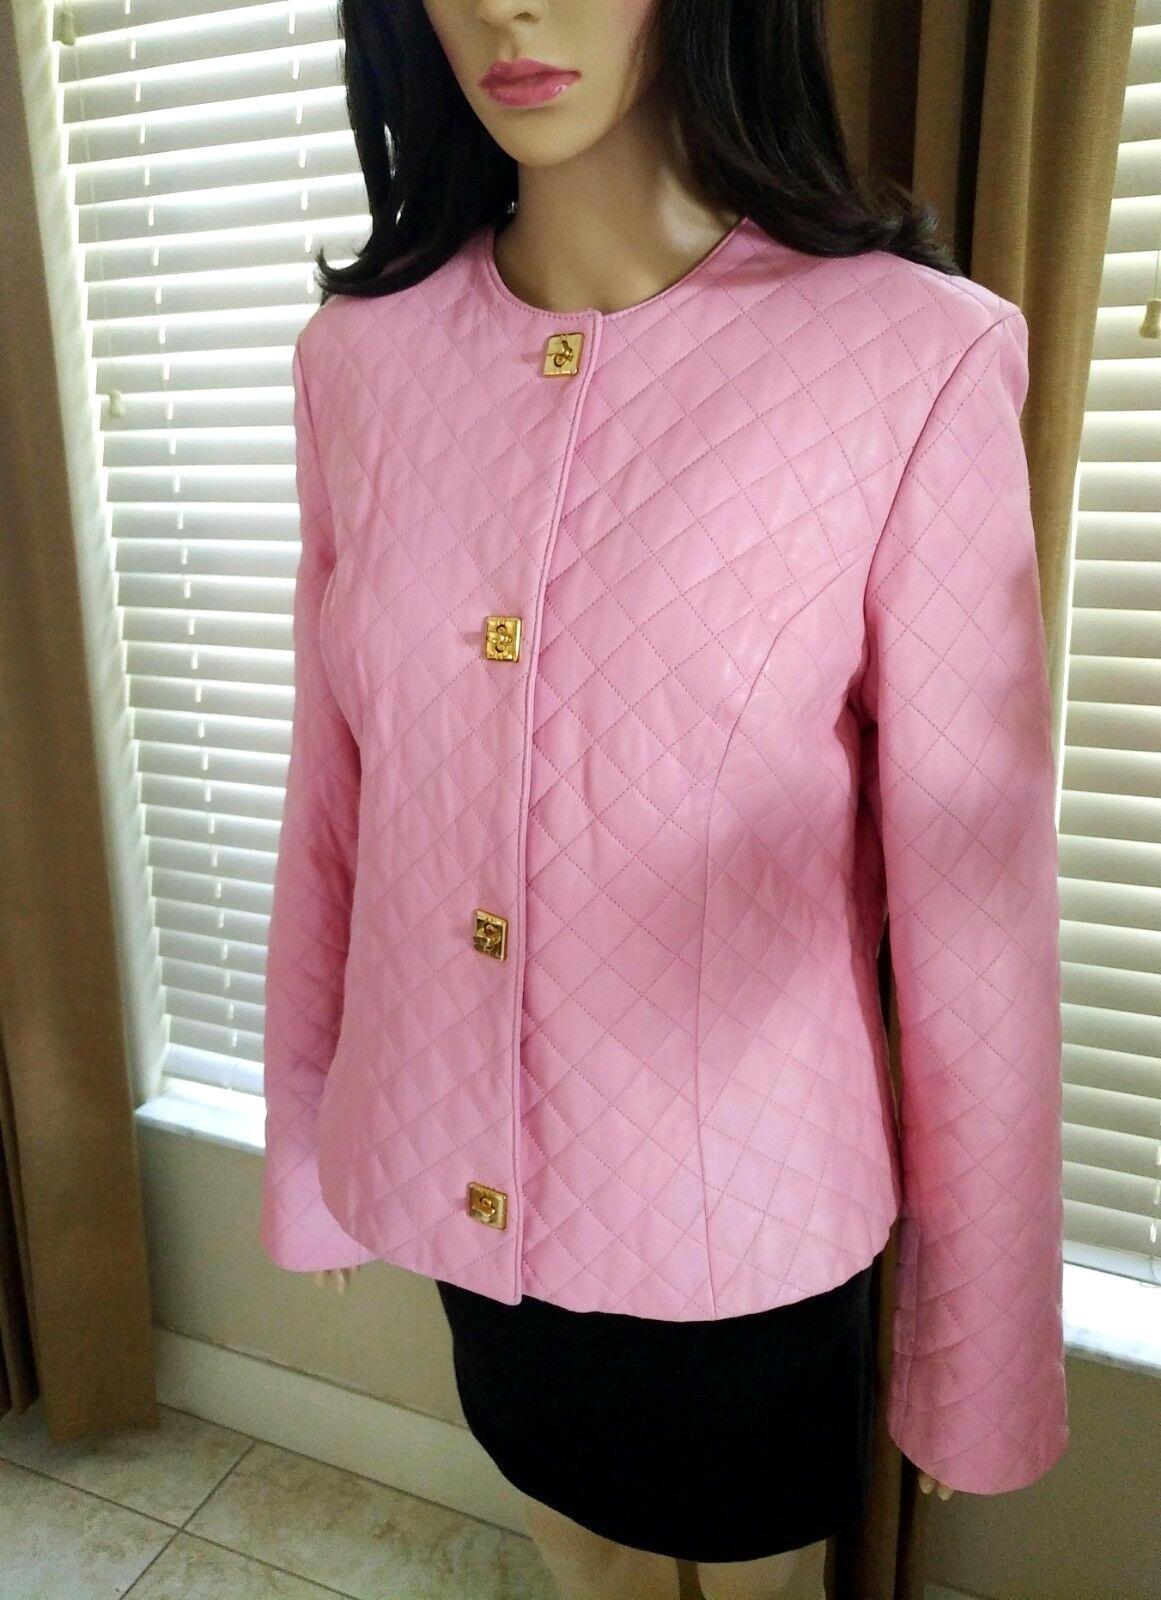  Gianfranco Ferre Petal Pink Quilted Lambskin Leather Jacket EU 38/ US 4 6 For Sale 6